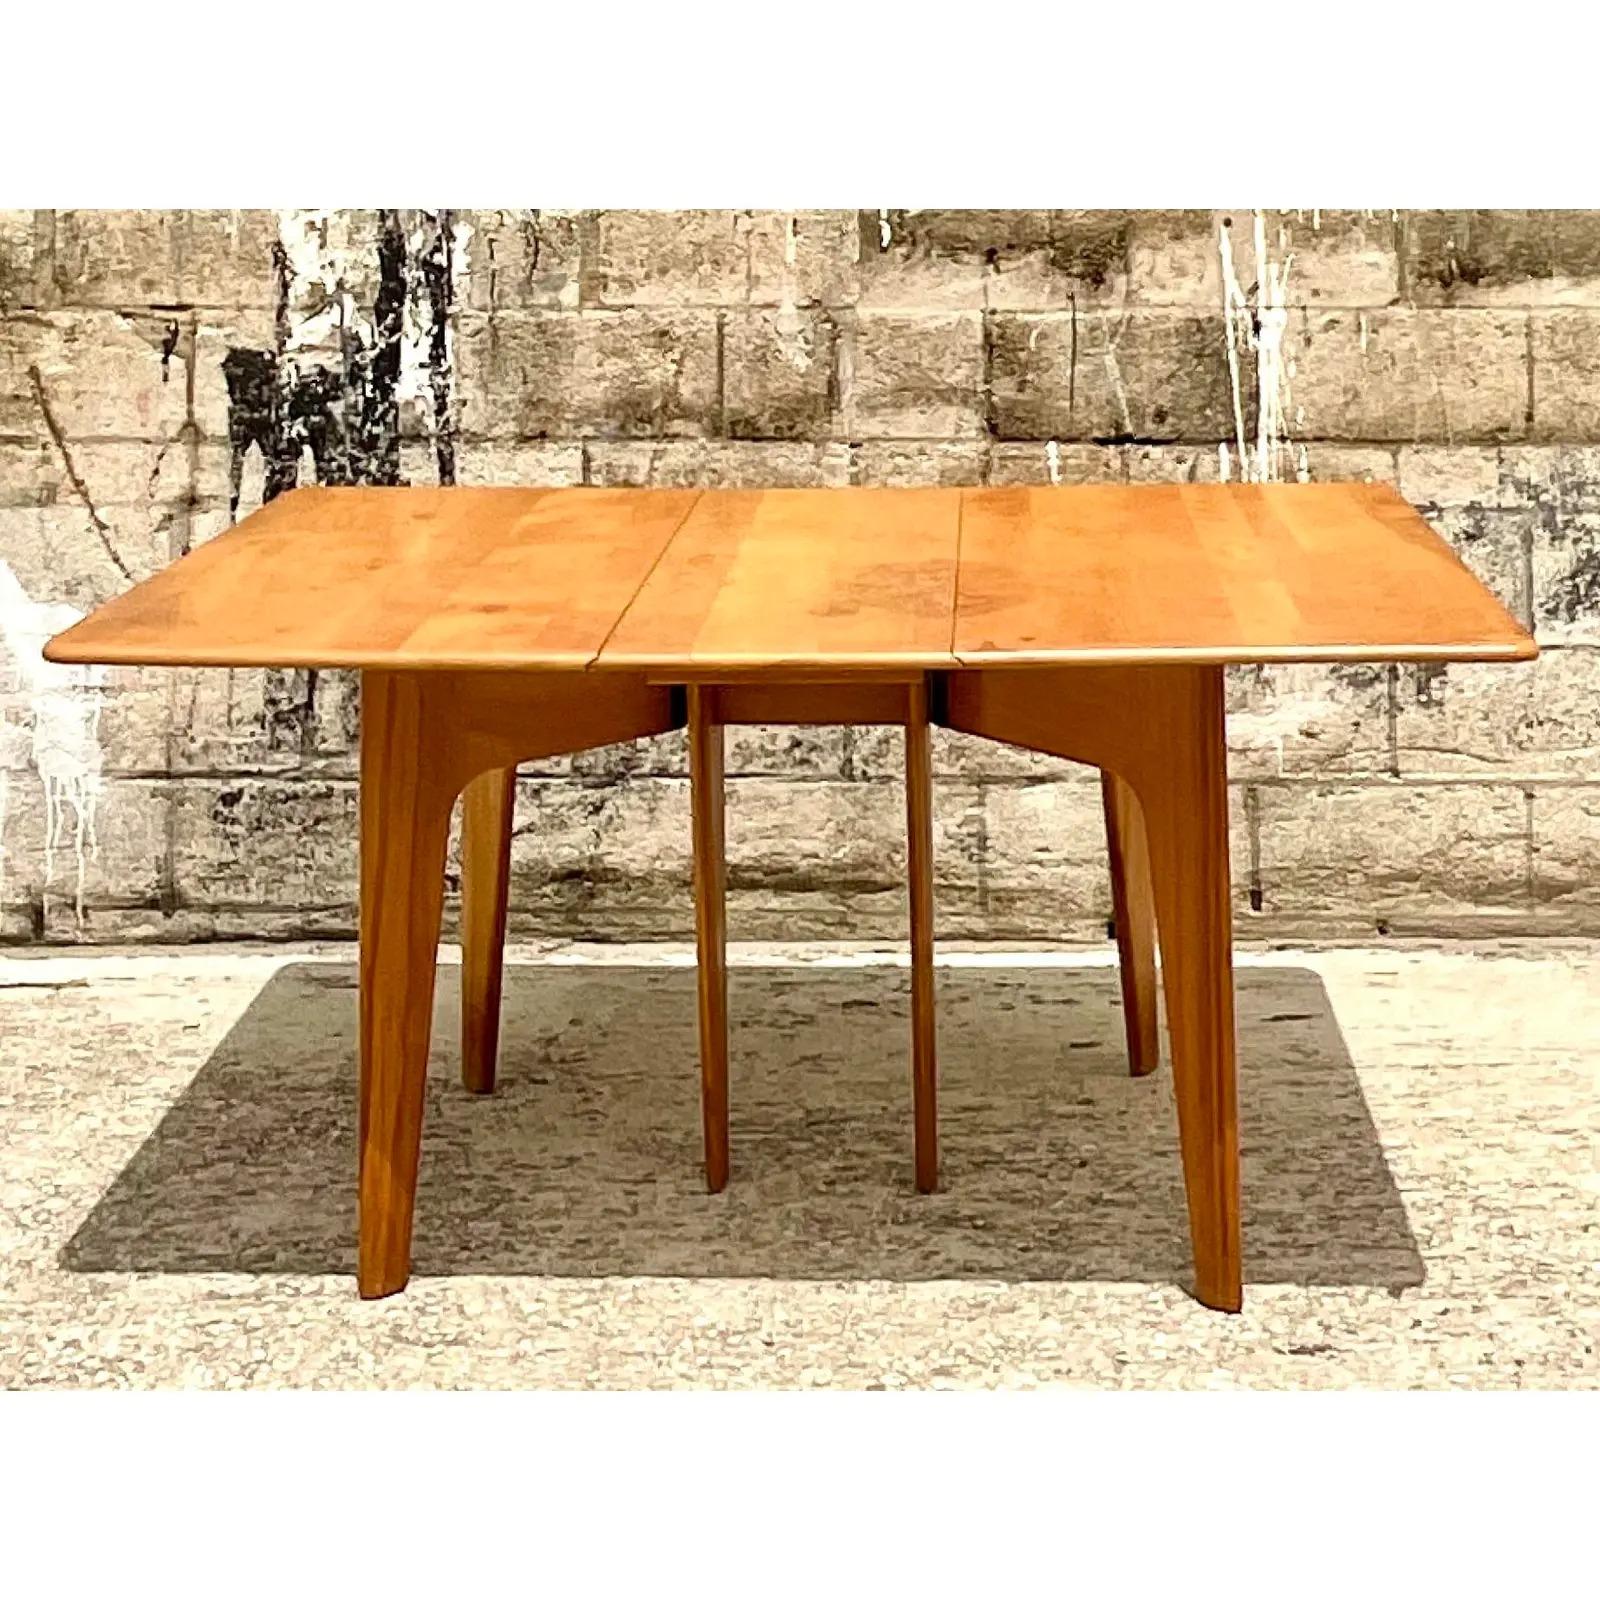 Vintage MCM Heywood Wakefield Drop Leaf Dining Table In Good Condition For Sale In west palm beach, FL